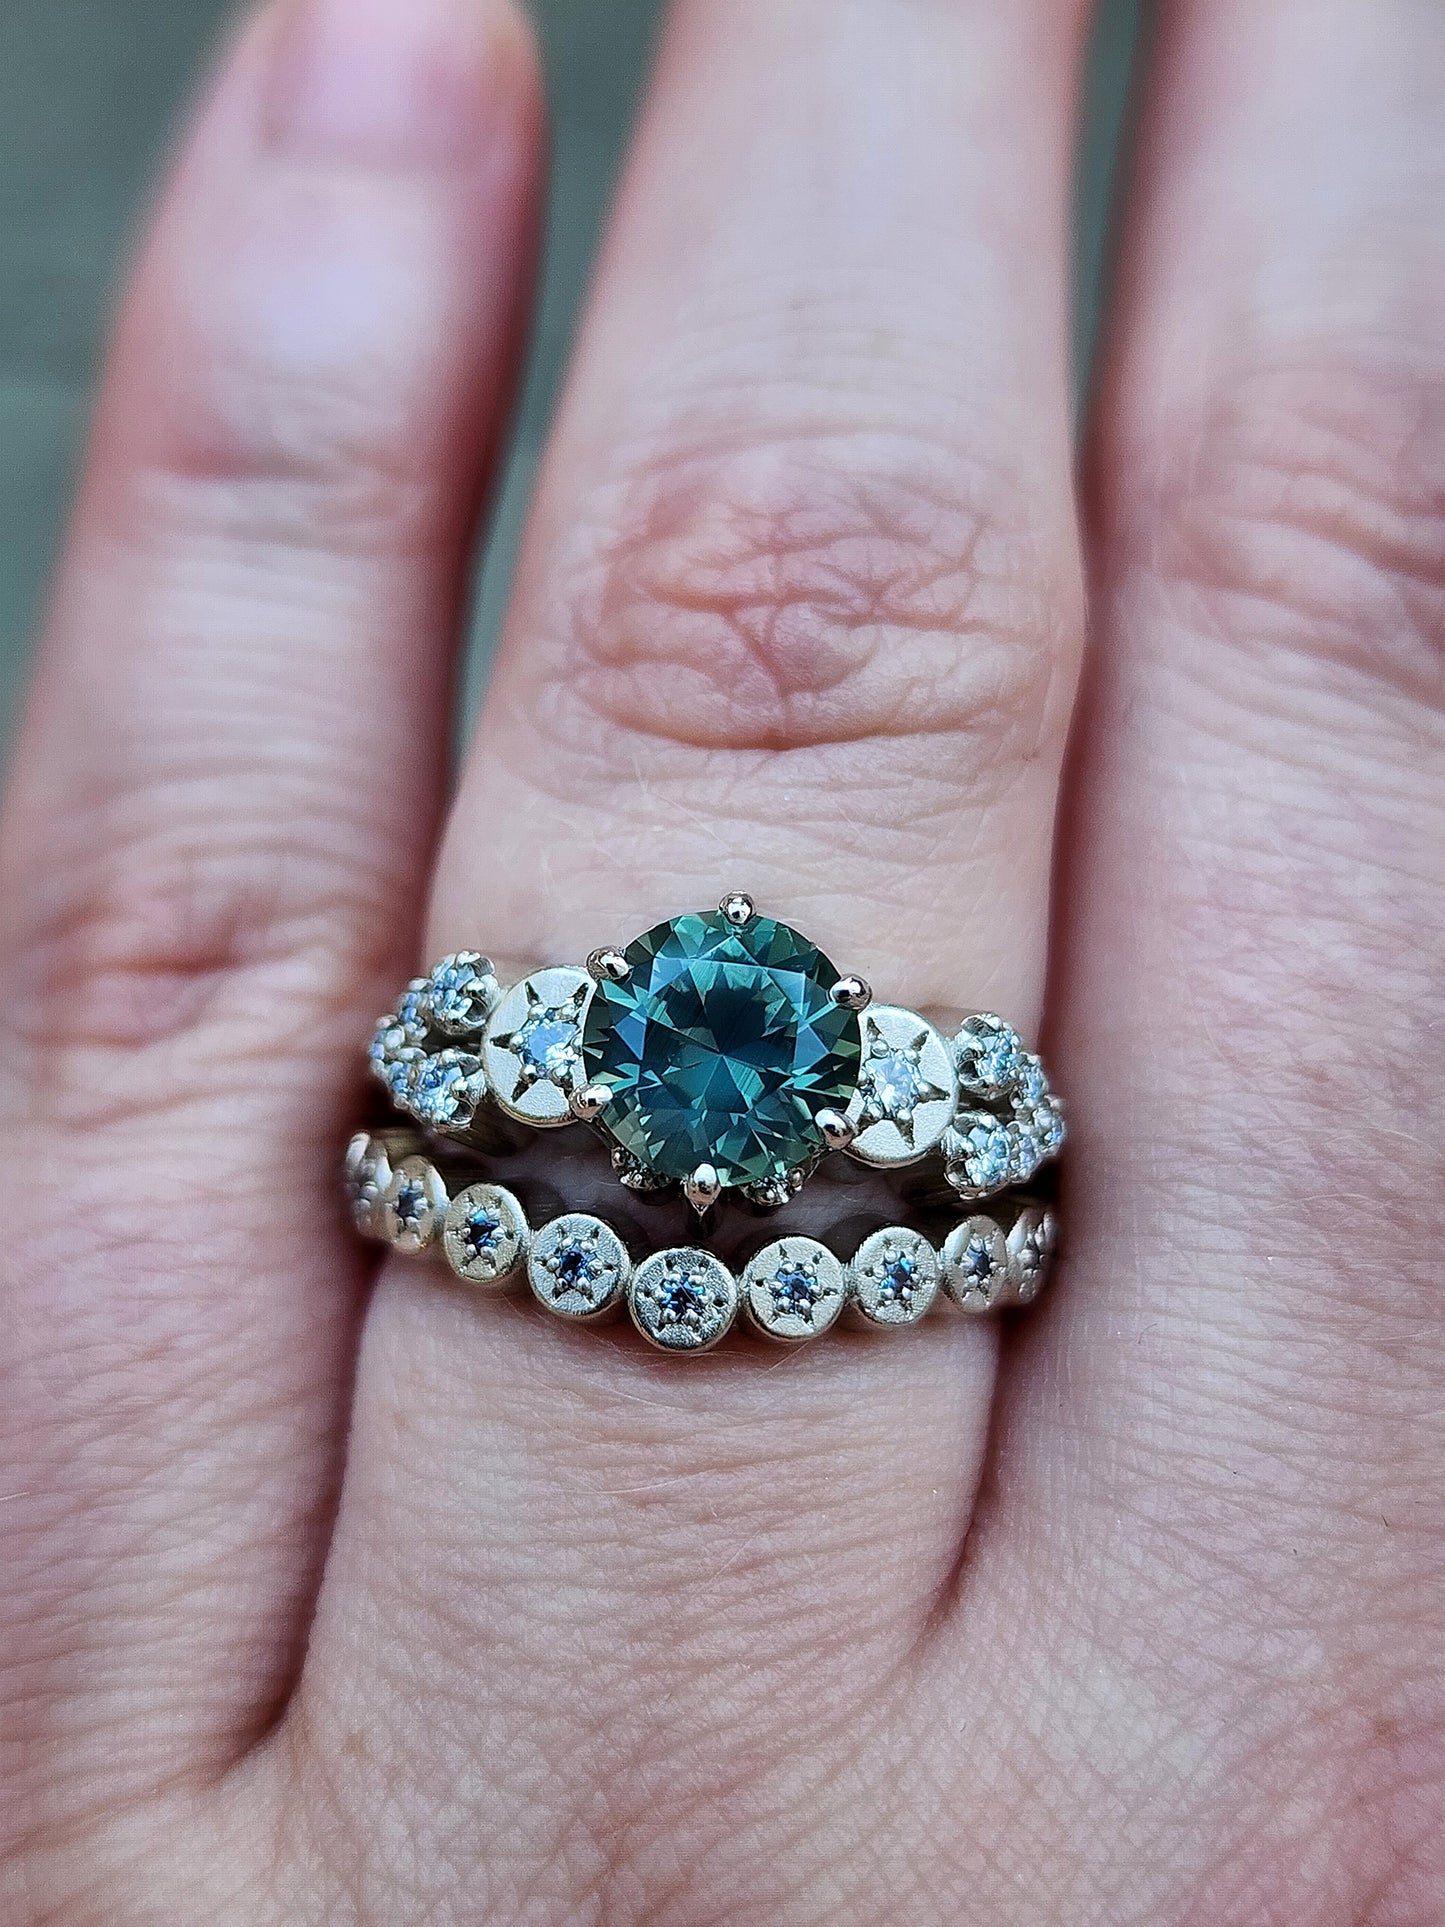 Silky Green Sapphire Cassiopeia Engagement Ring 1.65 Carats with Diamond Constellations and Sun Disk Wedding Band with Alexandrite Ready to Ship Size 6-8 14k Palladium White Gold